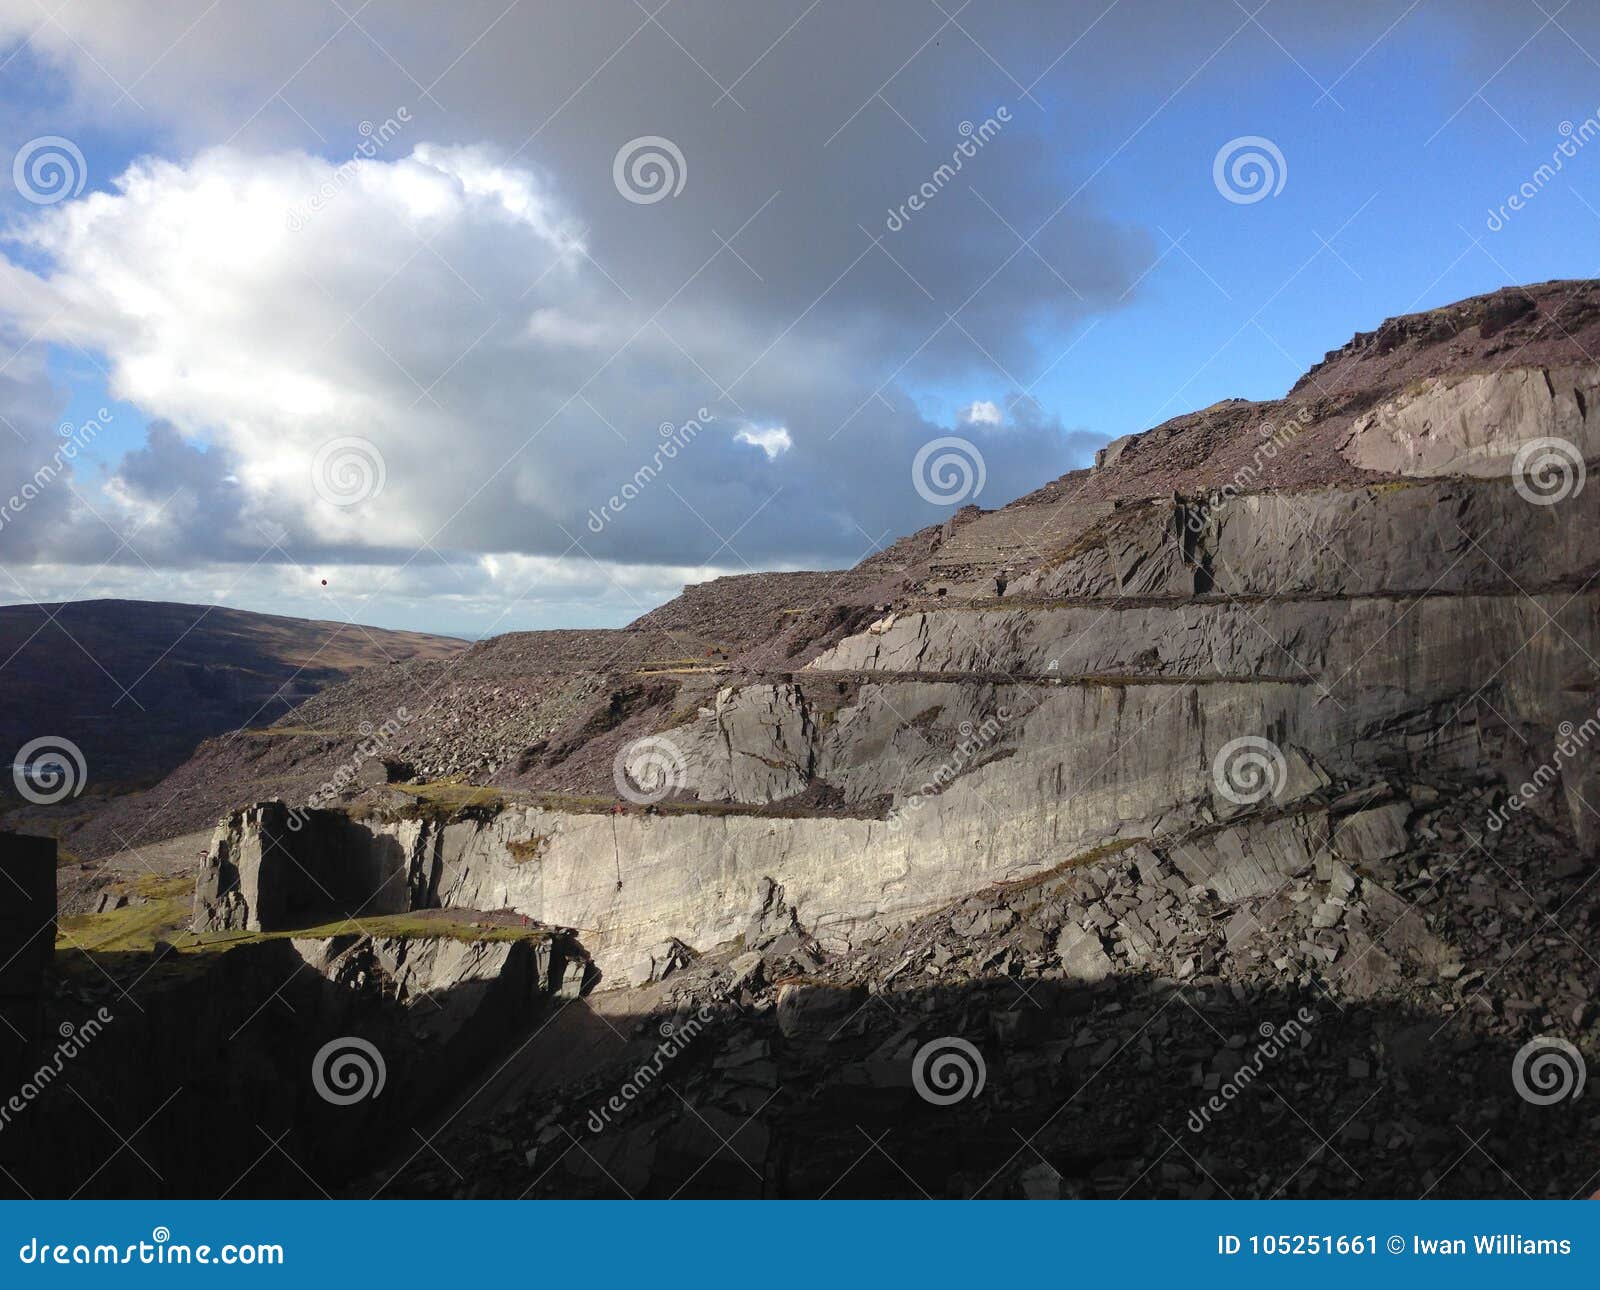 windy in a welsh quarry